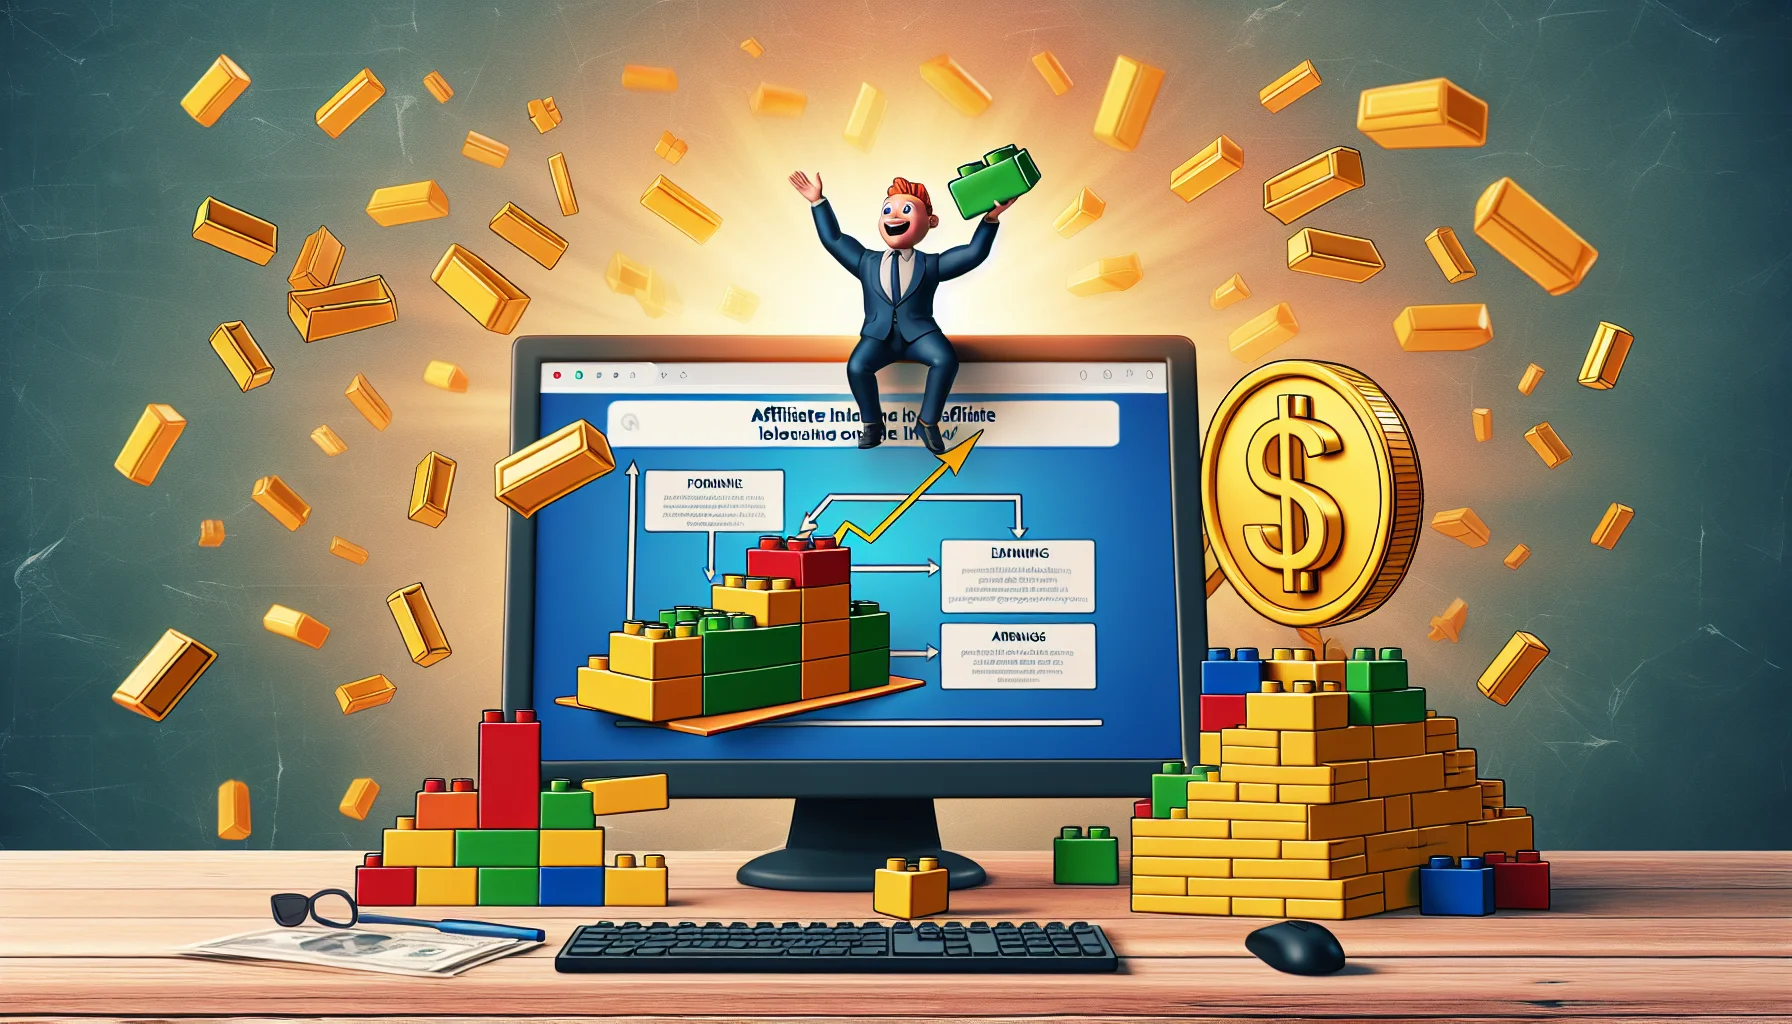 Generate an amusing, realistic depiction of a scenario related to online income generation. Specifically, visualize a step-by-step guide on becoming a block-building toy affiliate. The scene might include a computer screen displaying an easy-to-understand flow chart, a cartoonish figure joyfully navigating the process or a giant gold coin symbolizing earnings. This narrative should help audiences connect with the sense of fun and potential prosperity that comes with affiliate marketing in the block-building toy sector.